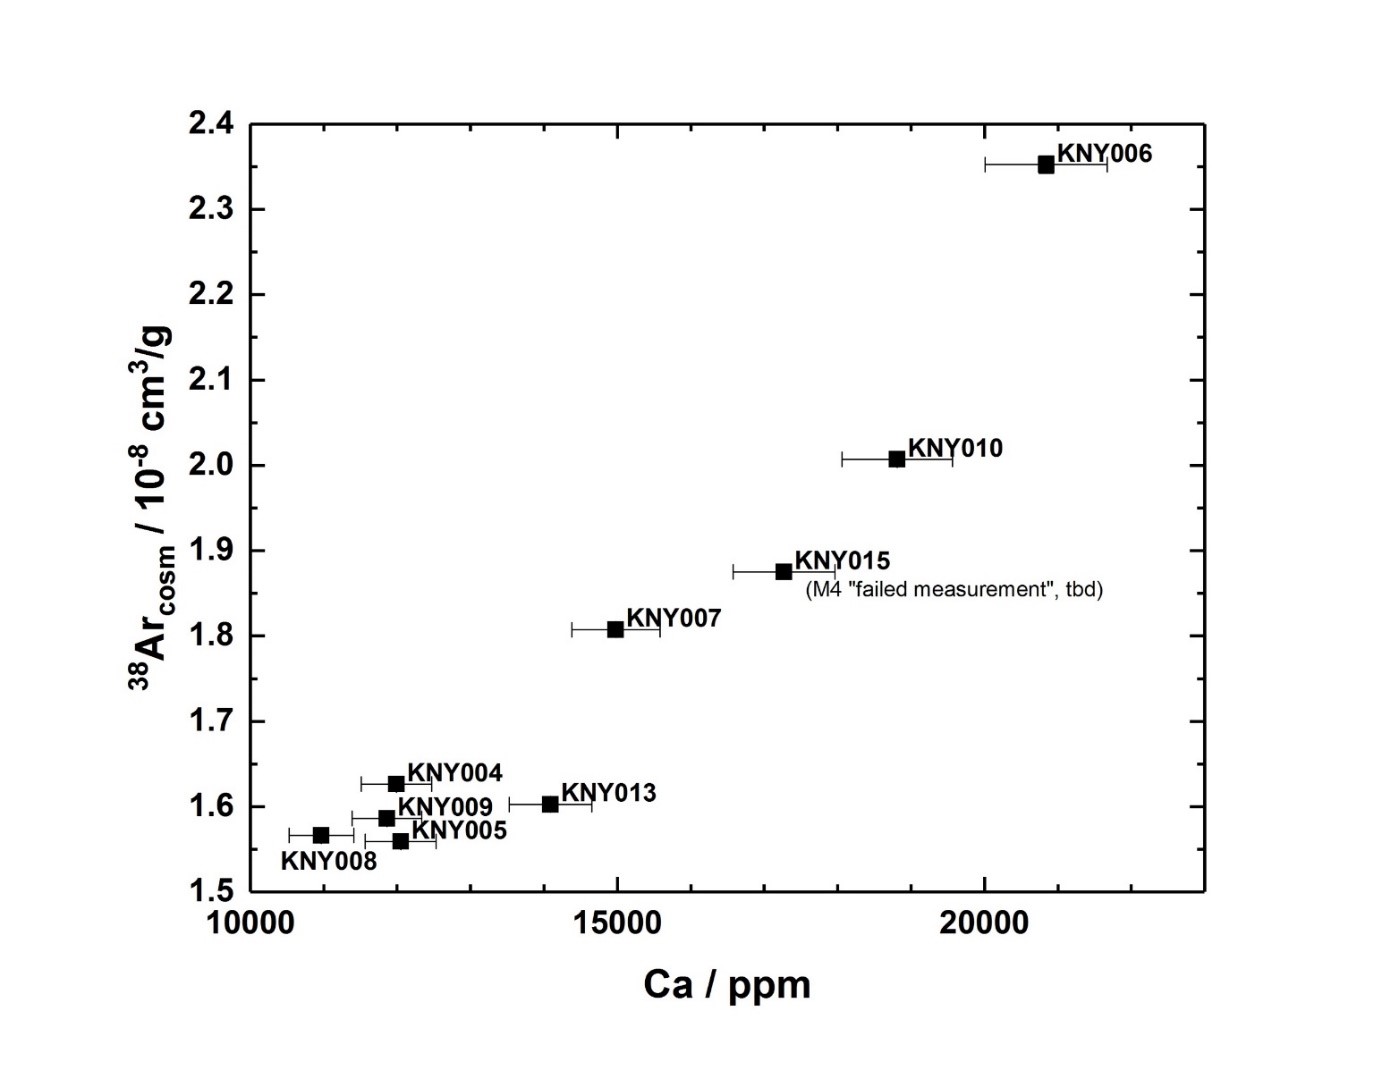 Figure: The concentration of cosmogenic 38Ar plotted against Ca concentrations for 9 separate aliquots of the Knyahinya chondrite. A strong correlation is seen, highlighting the dependence of 38Arcosm production on Ca concentration.